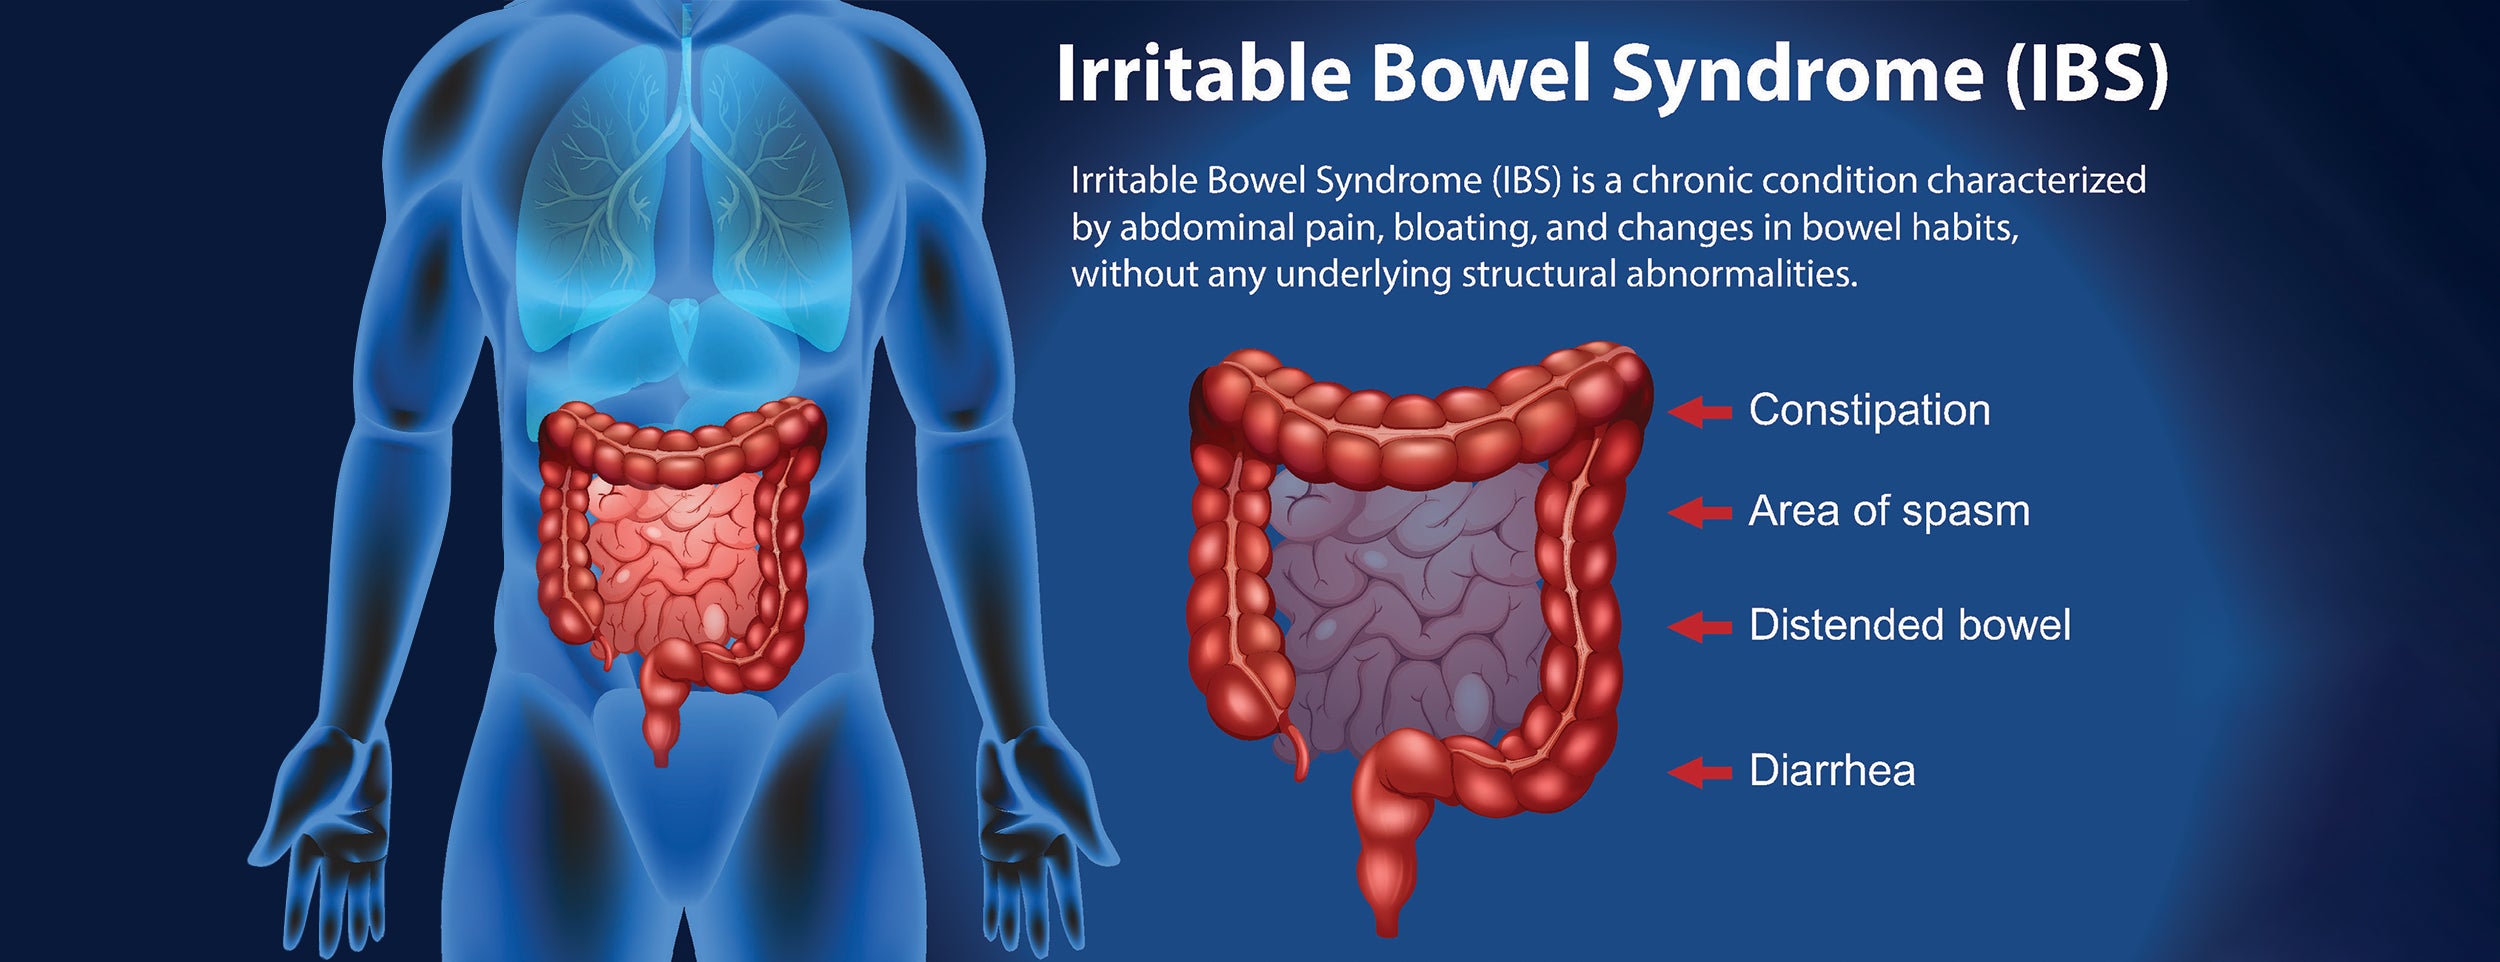 Irritable bowel syndrome associated with hemorrhoids mucus